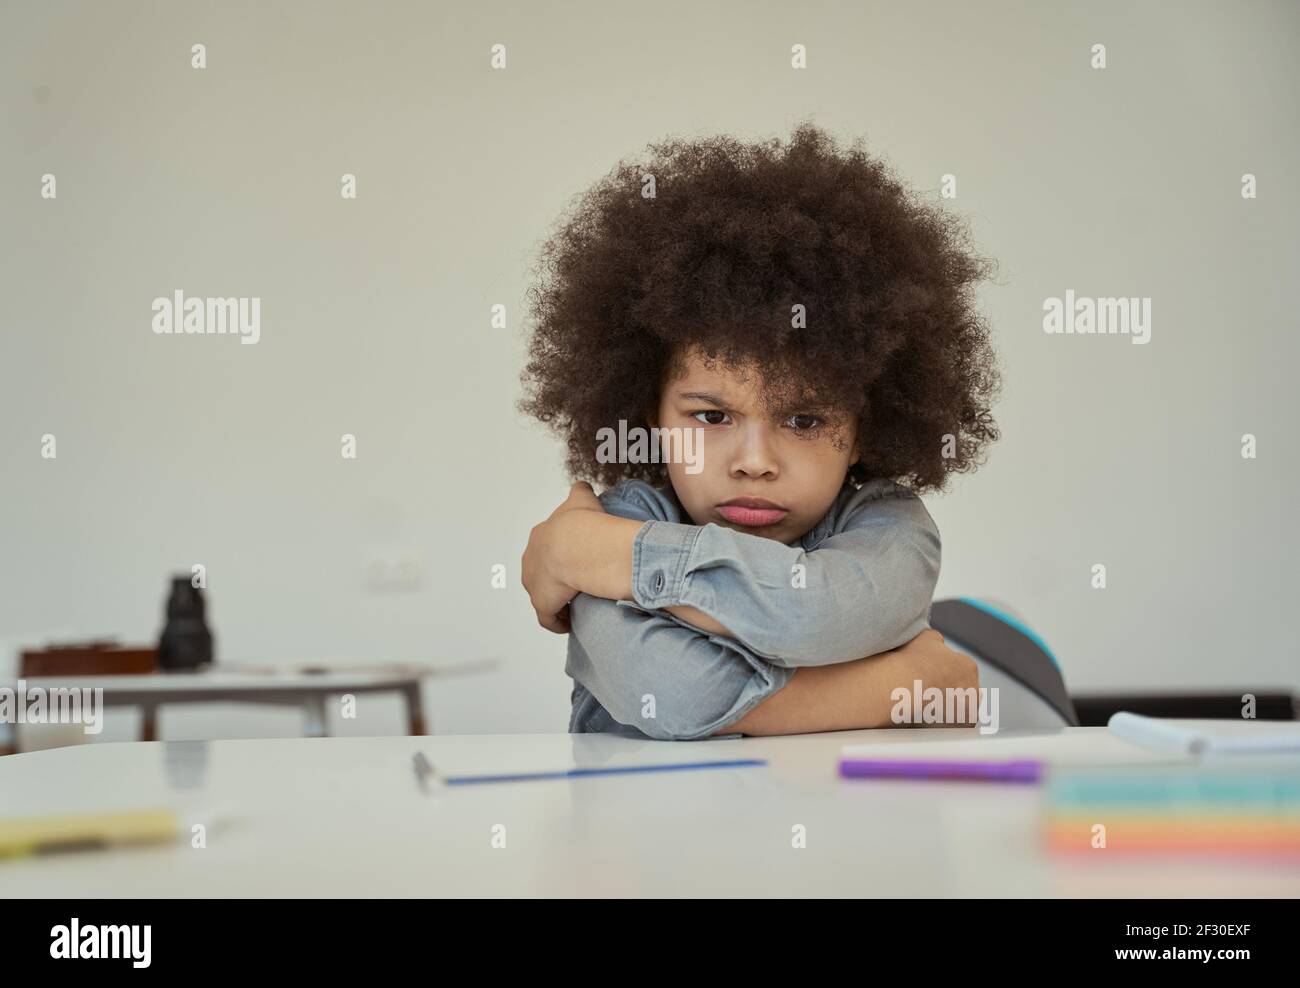 Disgruntled little schoolboy with afro hair looking resentful, frowning while sitting with arms crossed at the table in elementary school classroom Stock Photo